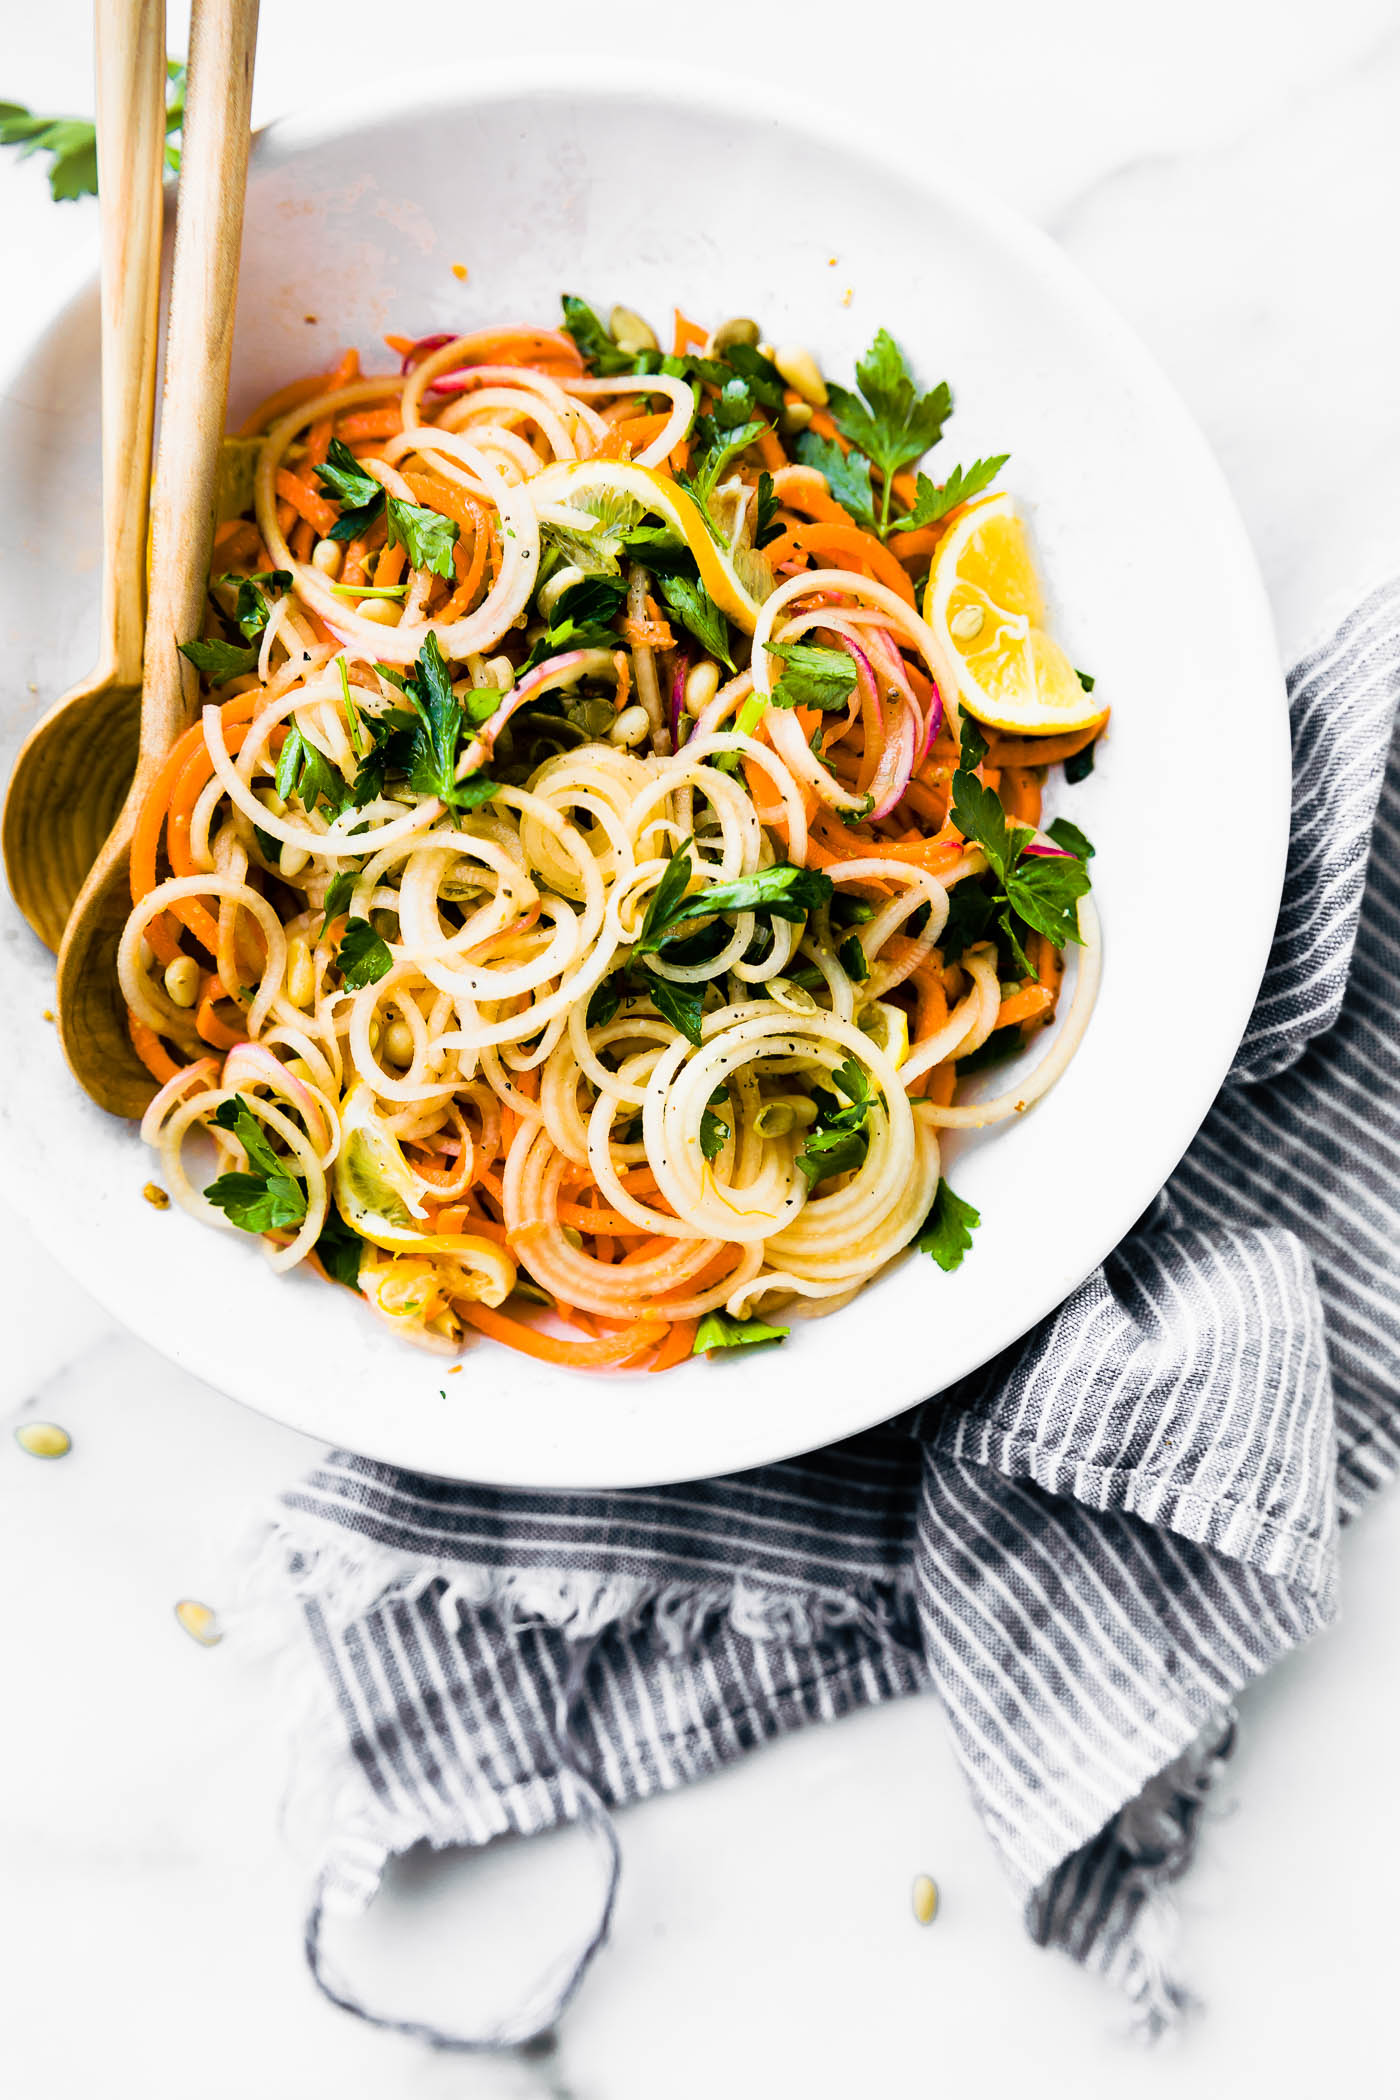 Light and Zesty Carrot Celeriac Spiralized Salad! This marinated vegetable spiralized salad is simple and healthy to make, not to mention delicious! A paleo, vegan, and whole 30 friendly veggie noodle salad option you can make under 30 minutes.